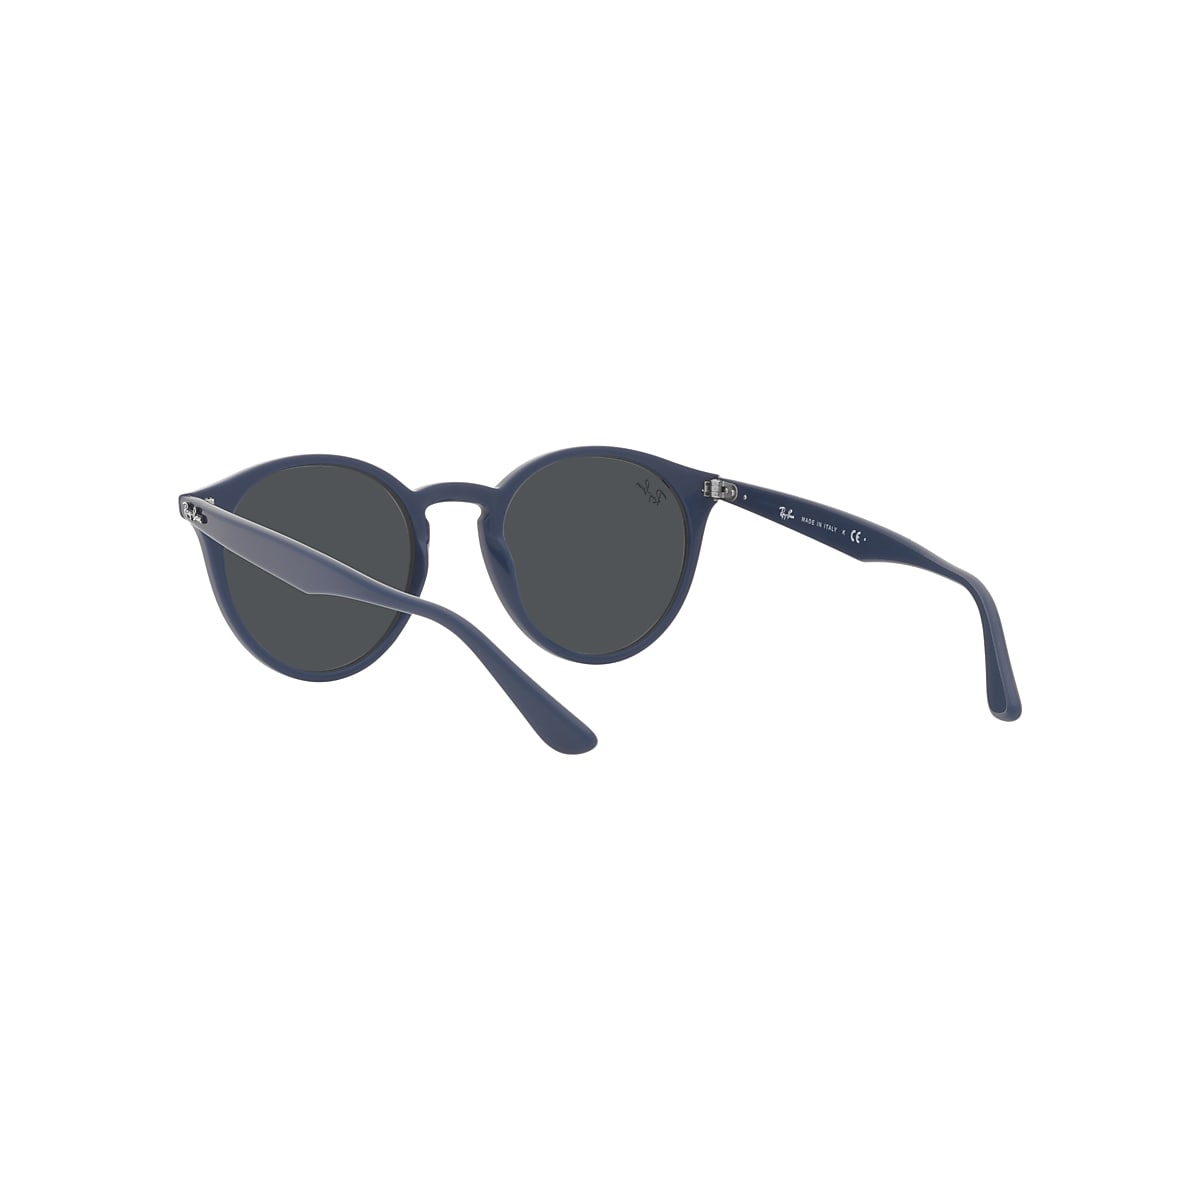 RB2180 Sunglasses in Blue and Dark Grey - RB2180F | Ray-Ban® US